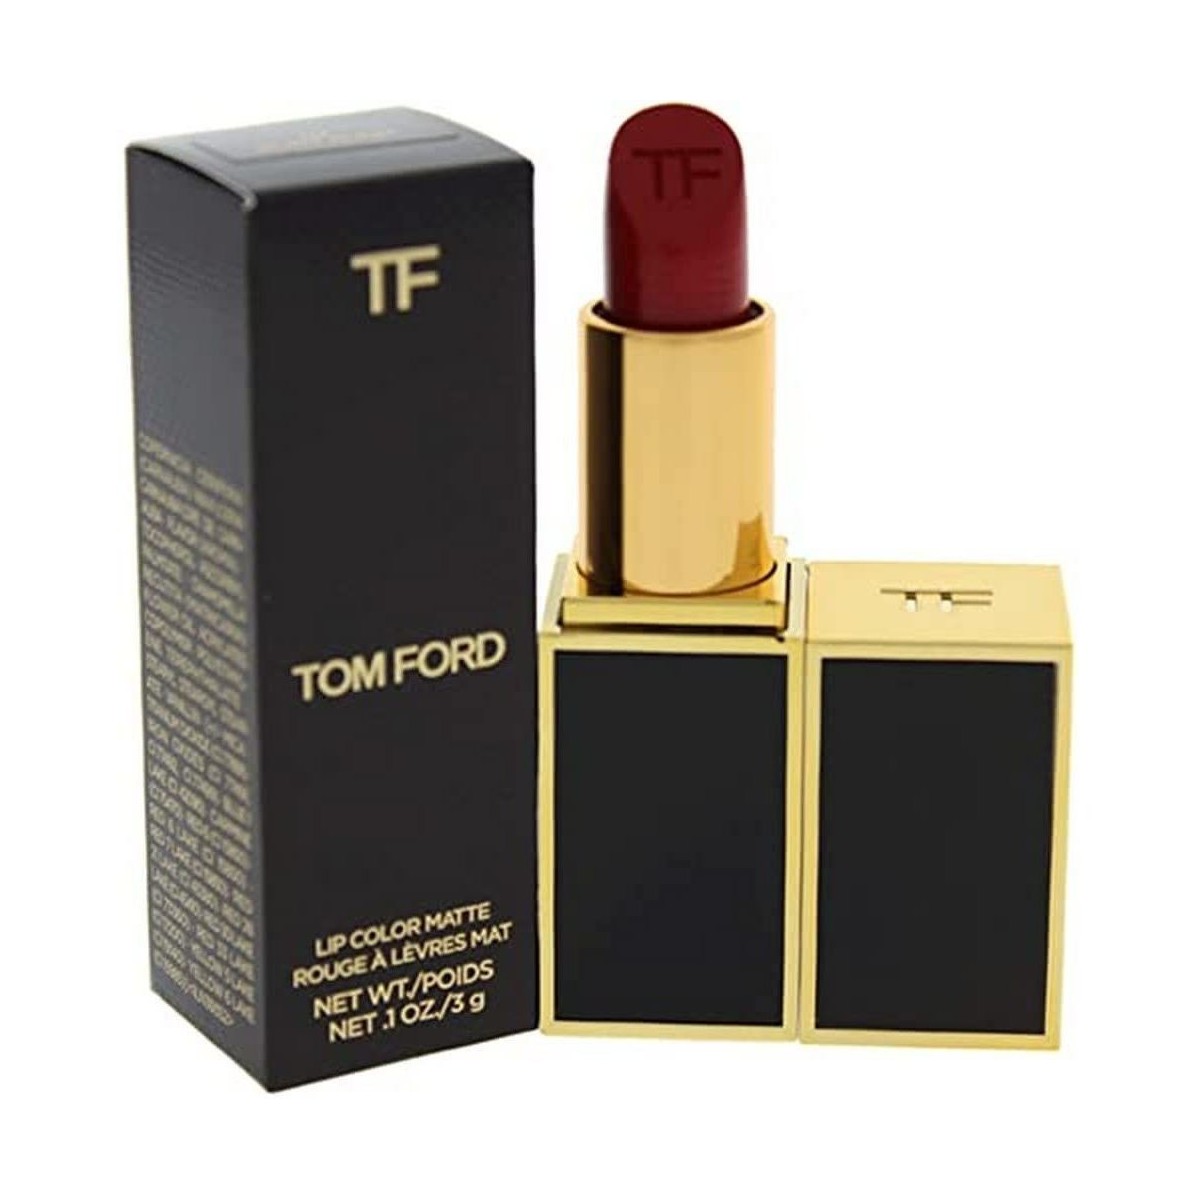 Belleza Mujer Perfume Tom Ford Lip Colour Satin Matte 3g - 12 Scarlet Leather Lip Colour Satin Matte 3g - 12 Scarlet Leather